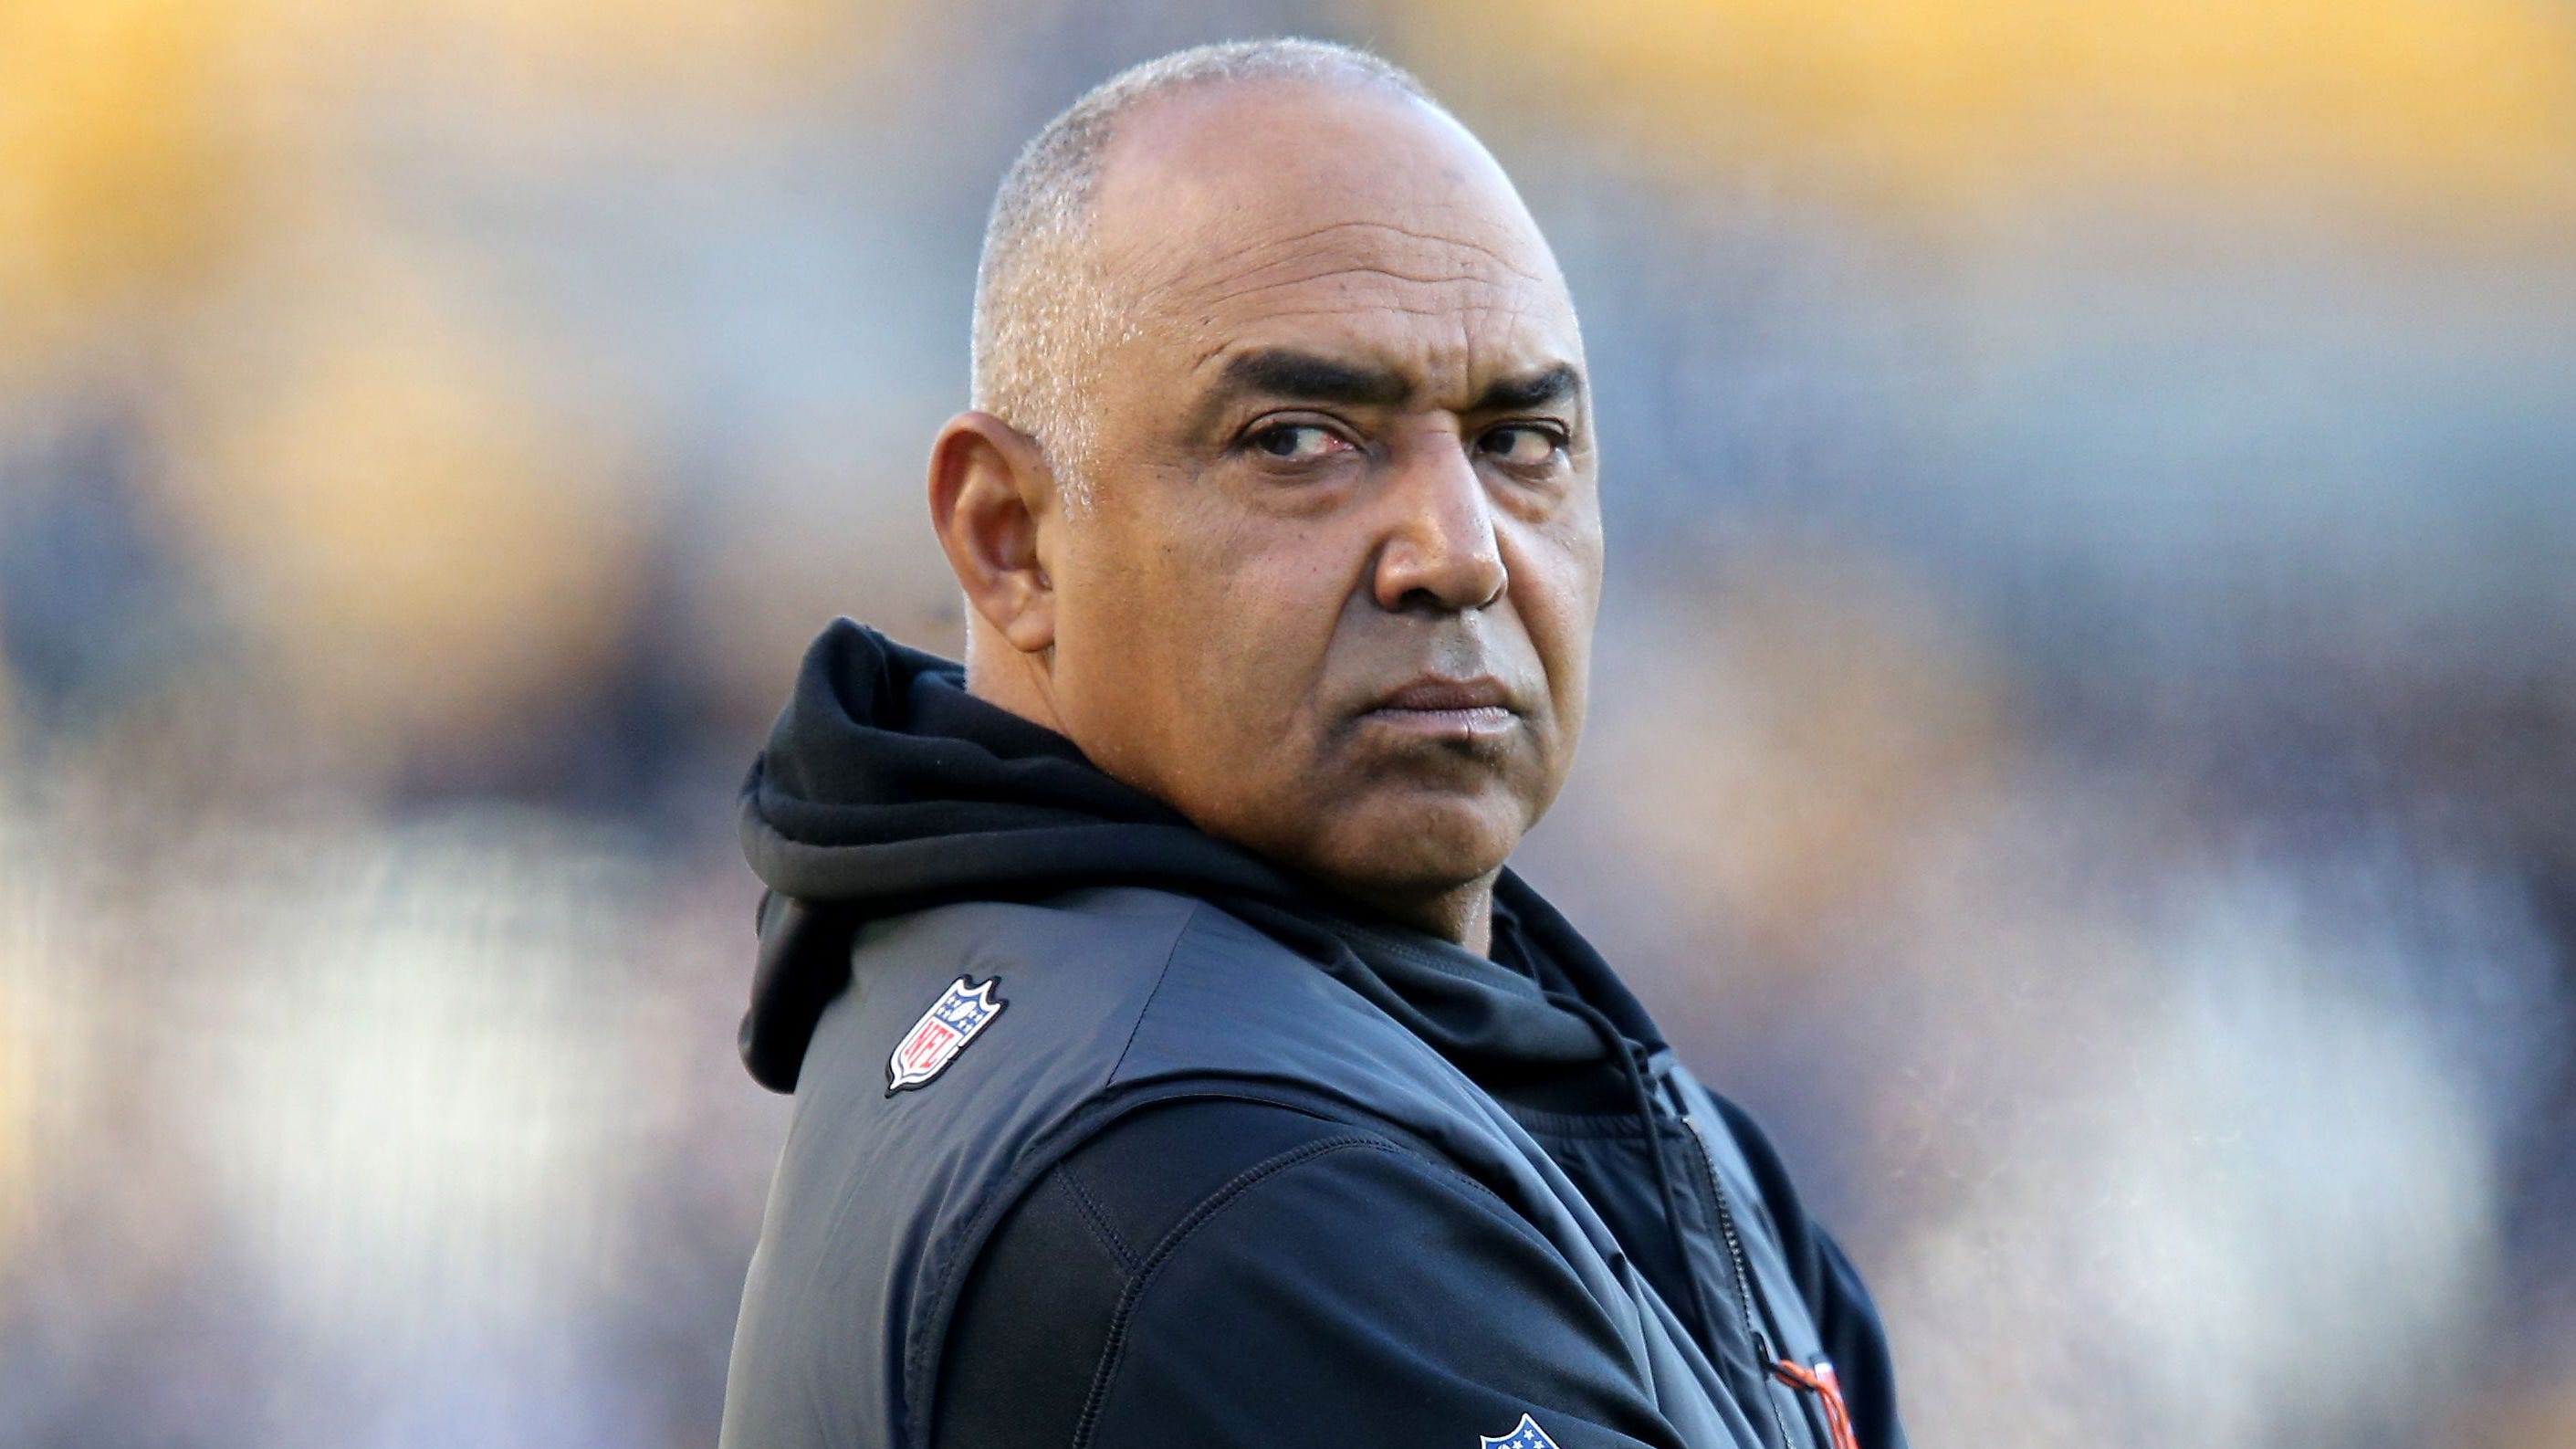 Cincinnati Bengals' about-face on coaching diversity exemplifies NFL's struggles | Opinion